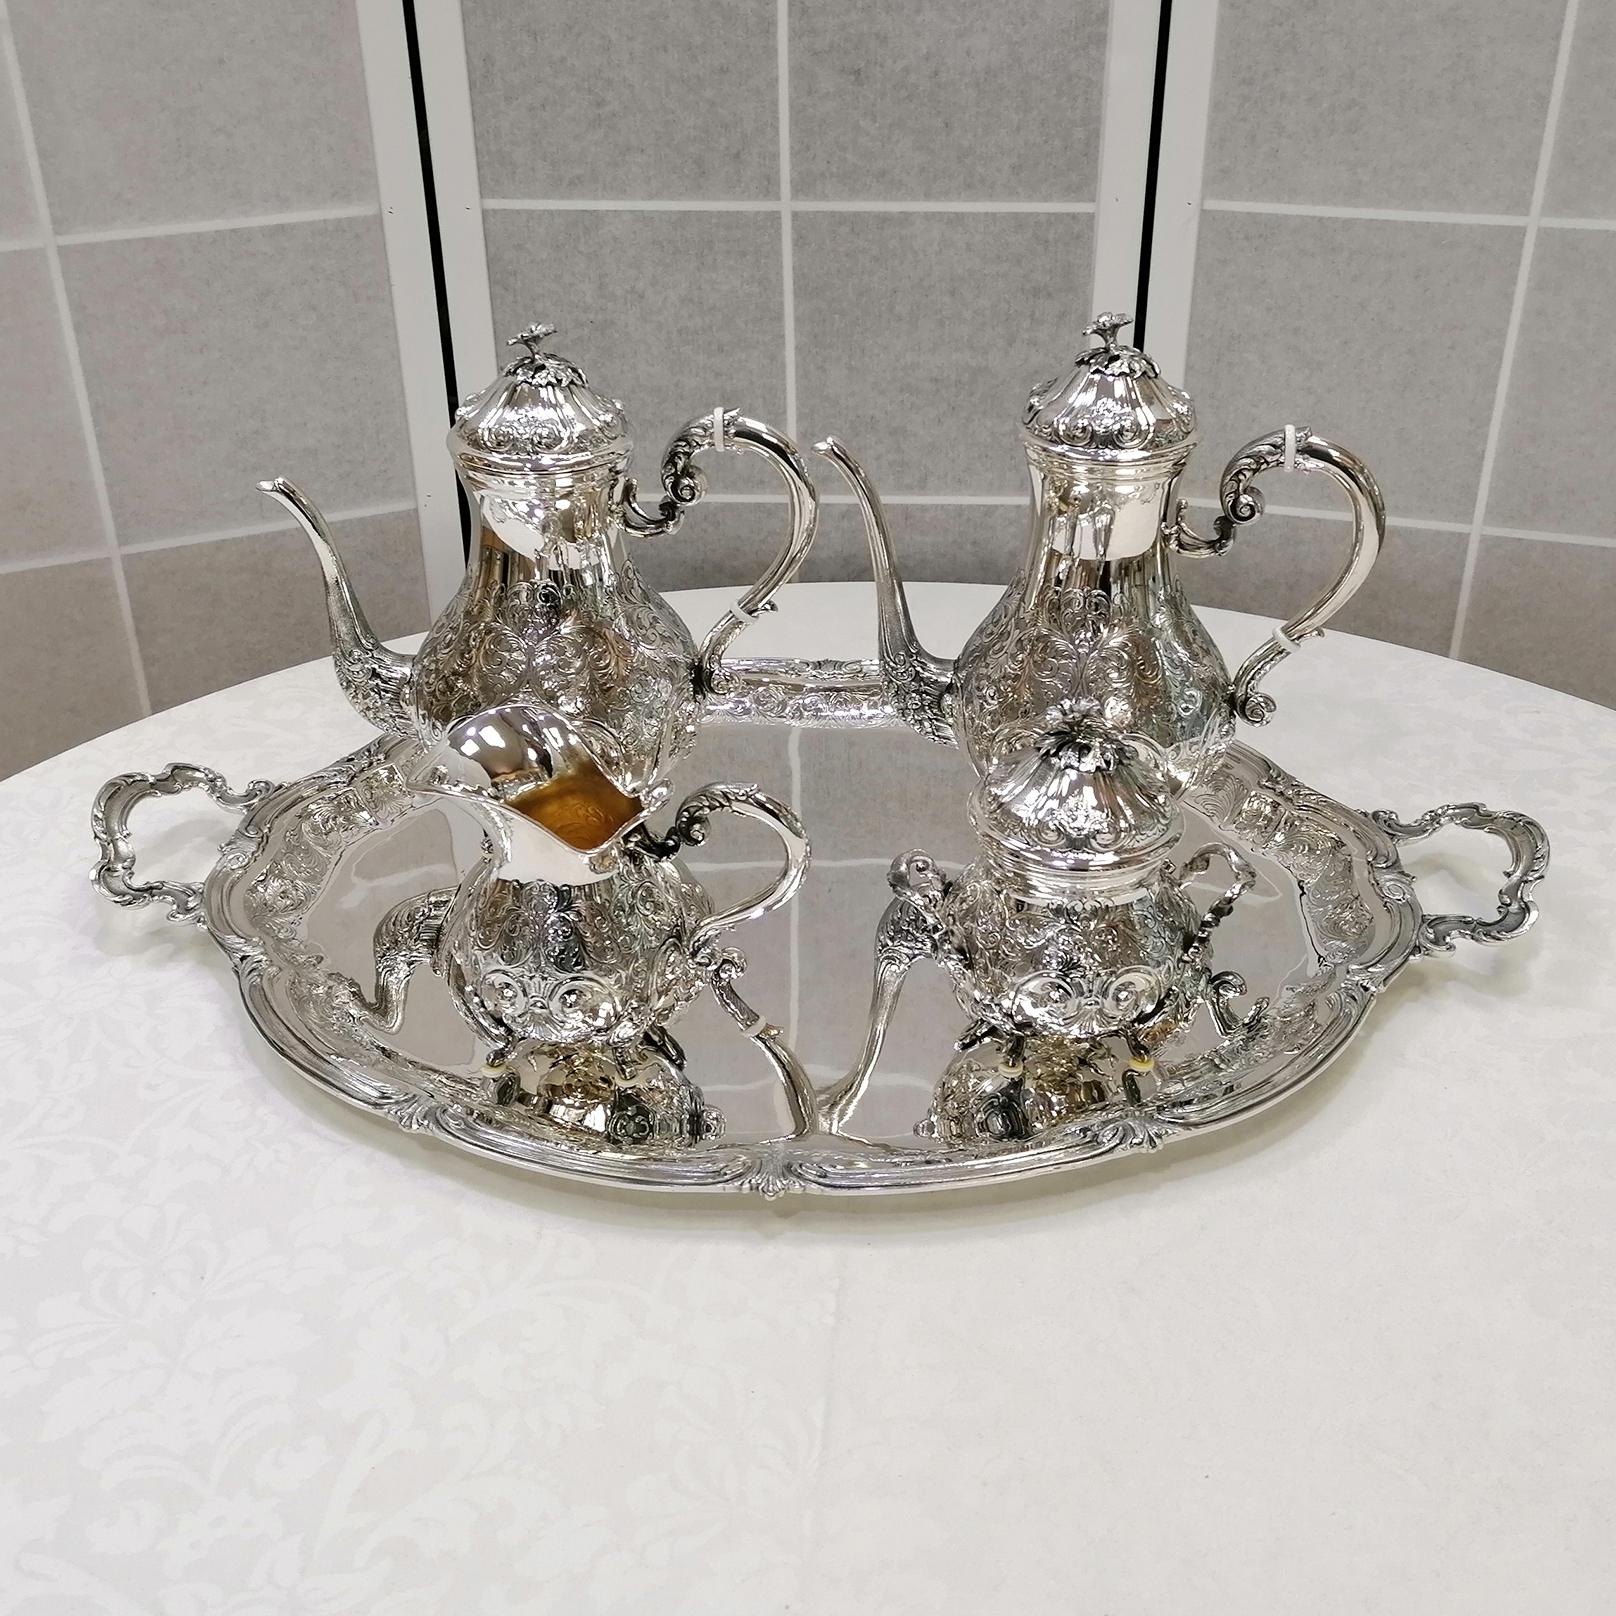 Important sterling silver tea and coffee service.
The service was entirely handmade in the Baroque style.
The body of the coffee pot, teapot, milk jug and sugar bowl is round and have been embossed with a shell design, typical of the Baroque